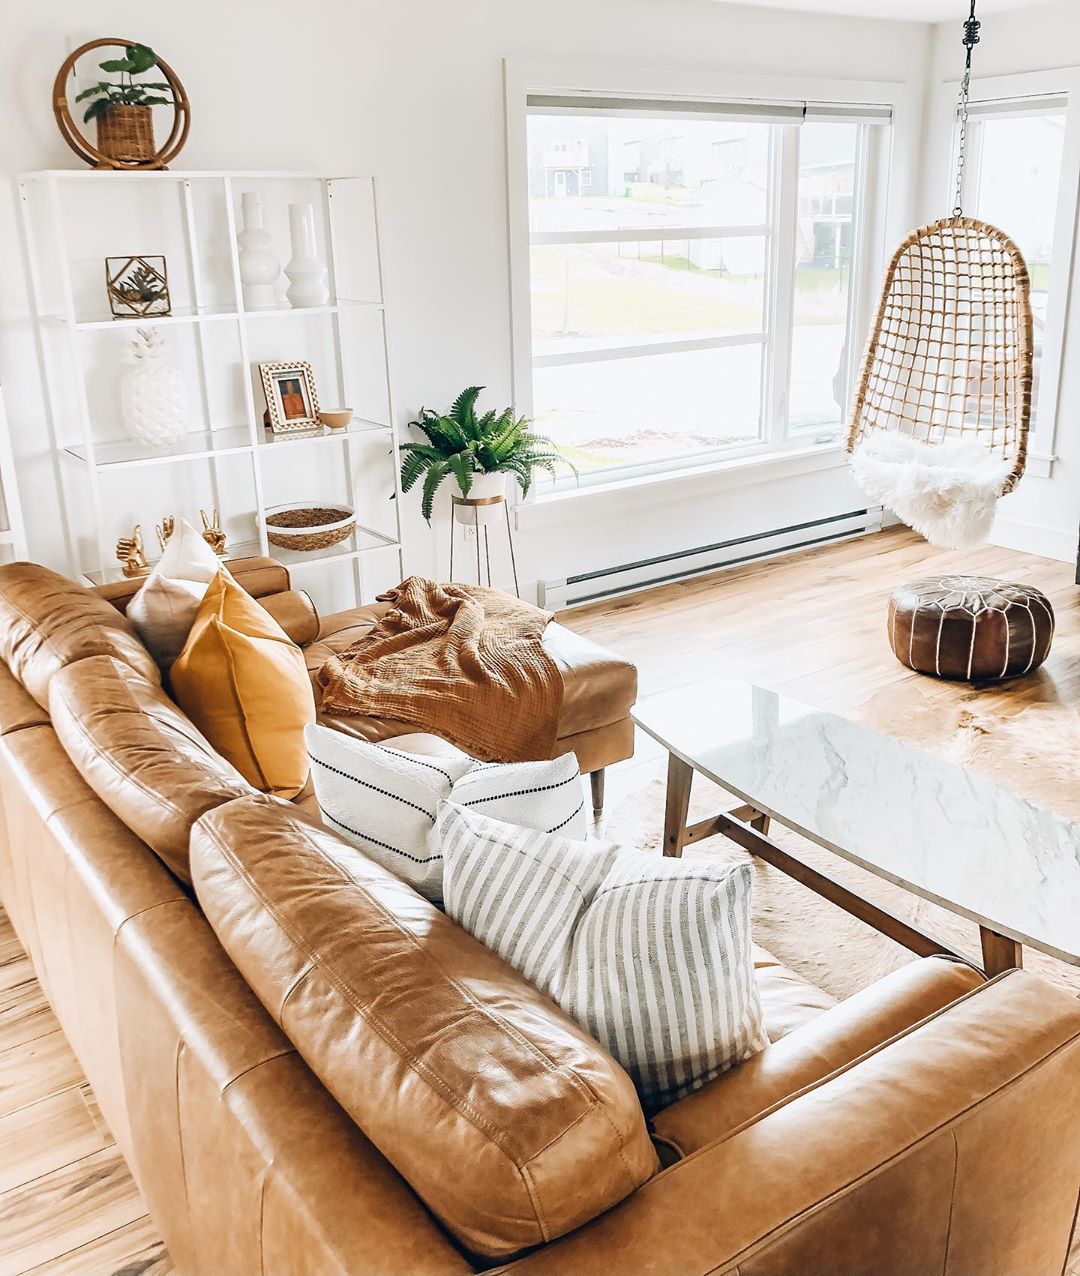 White-painted living room with tan leather couch and chair hung in corner. Photo by Instagram user @boneill_athome